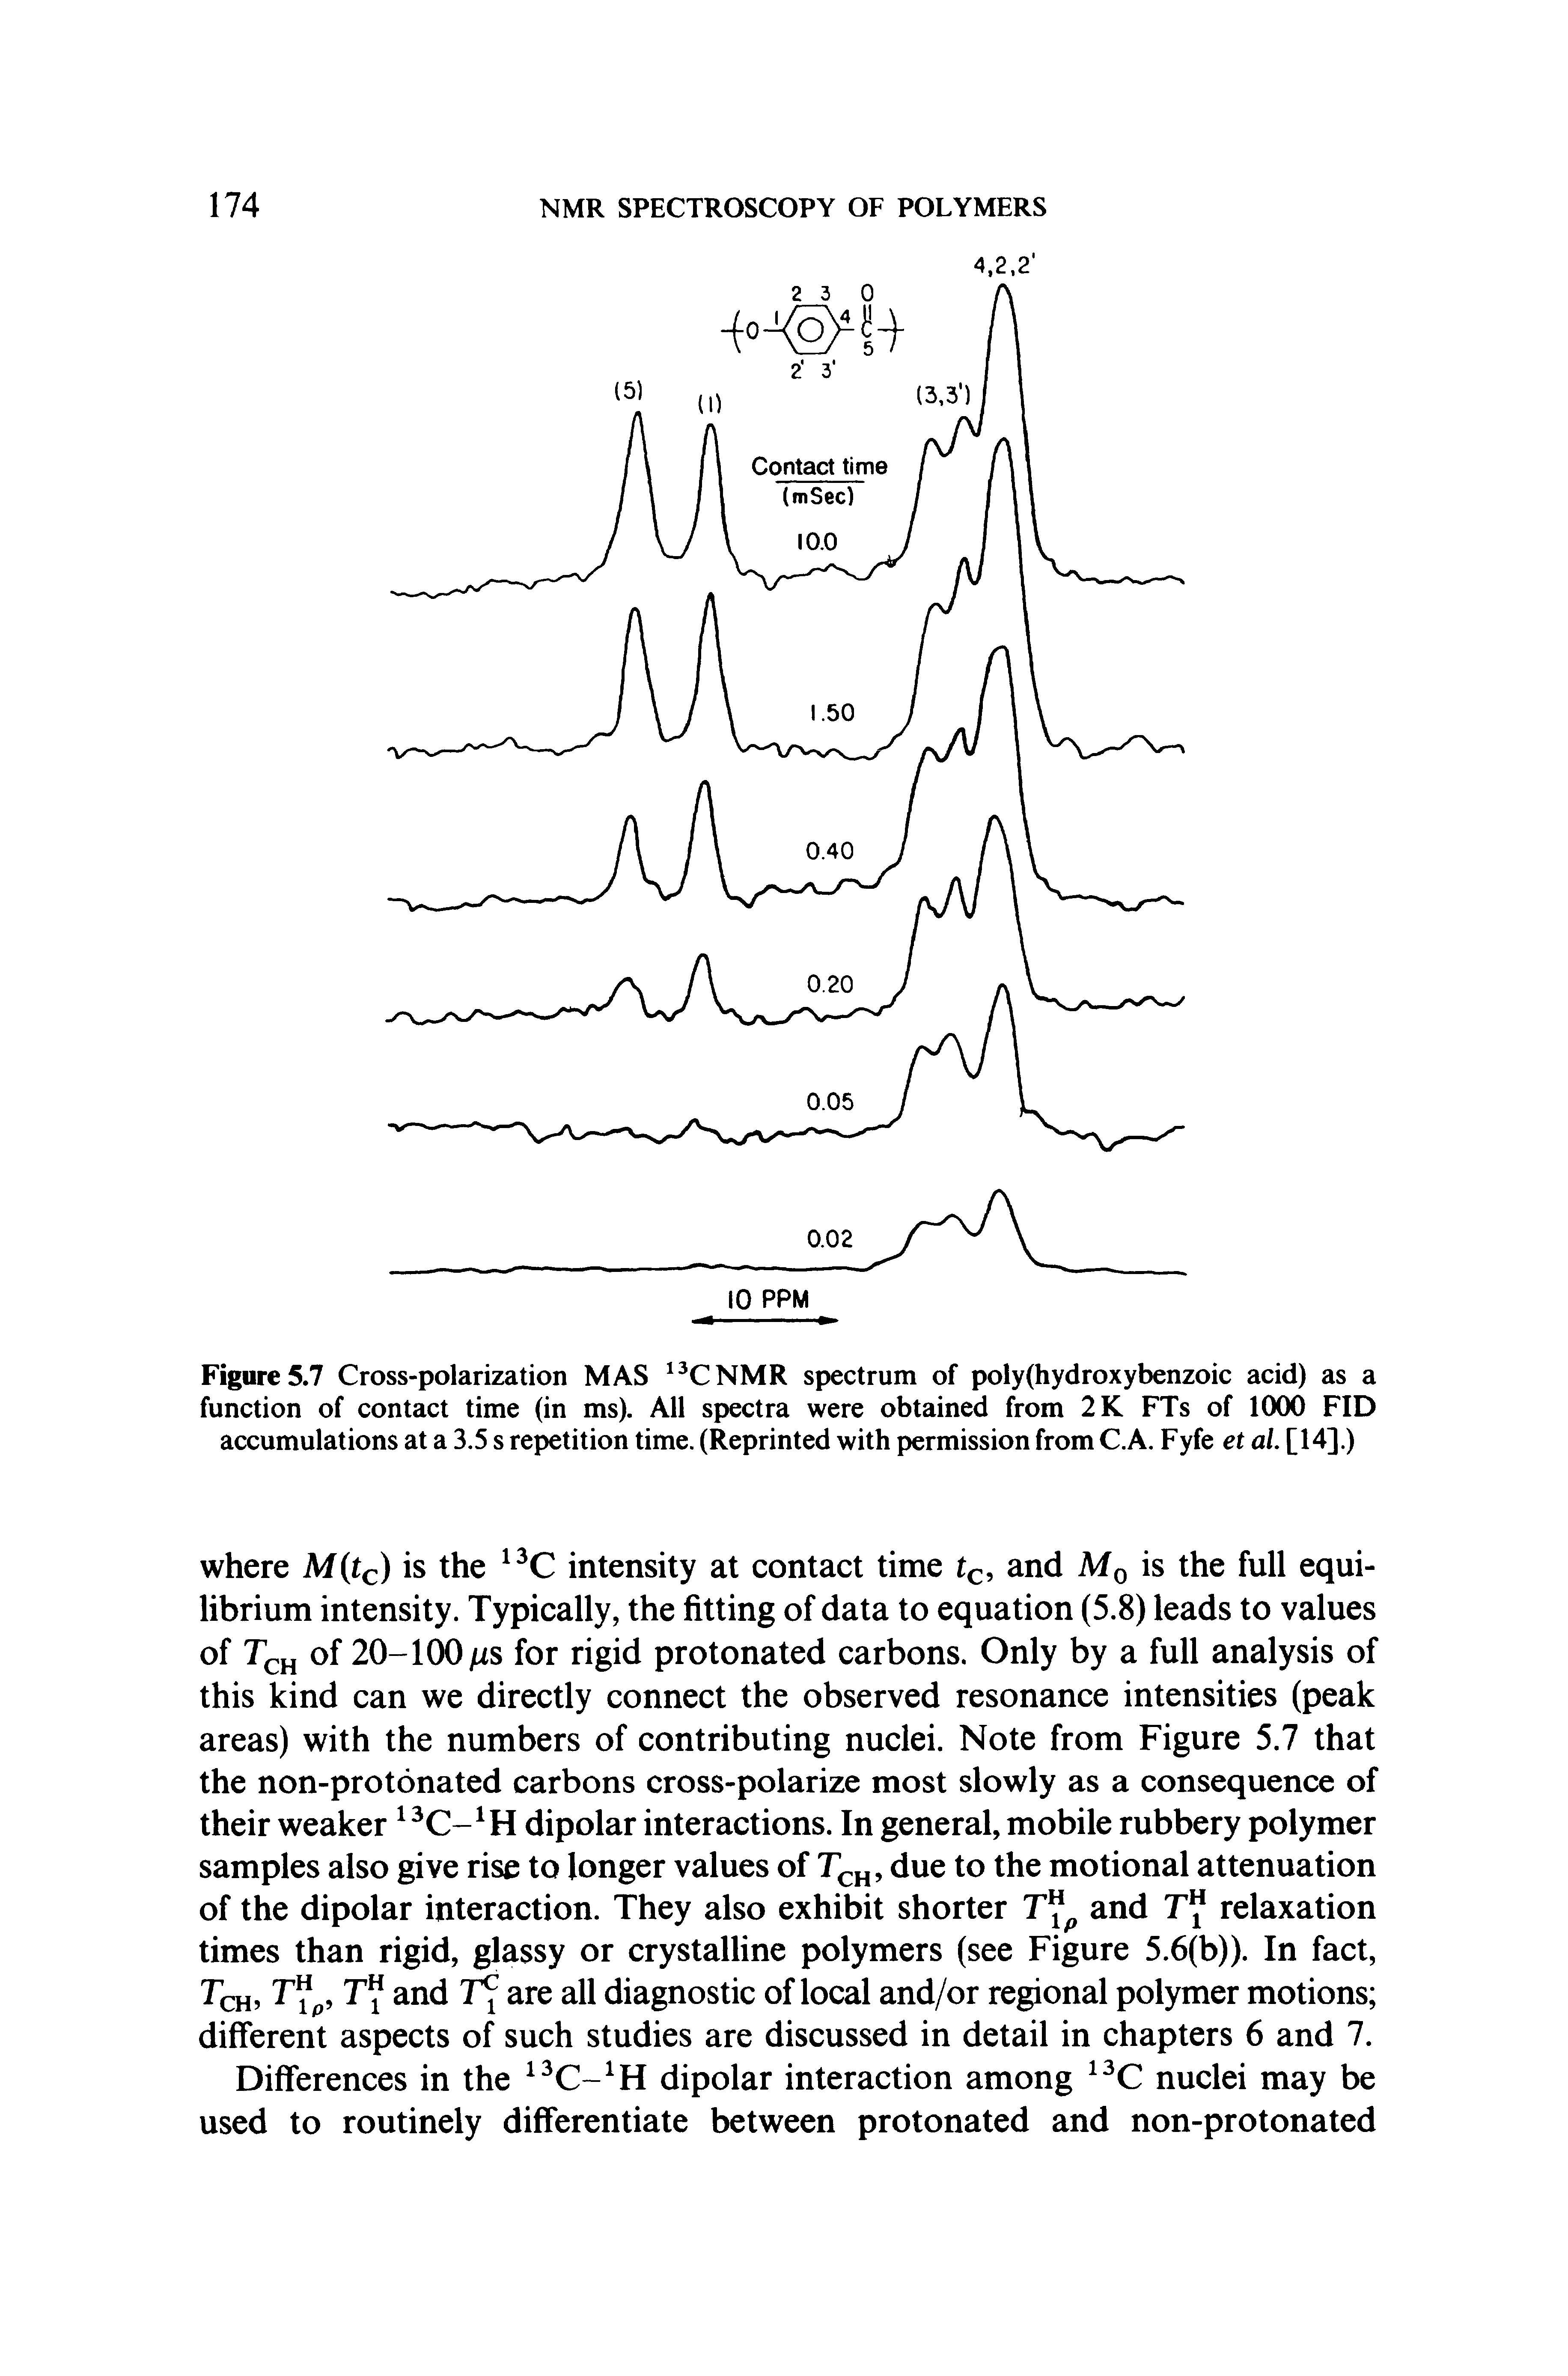 Figures. Cross-polarization MAS CNMR spectrum of poly(hydroxybenzoic acid) as a function of contact time (in ms). All spectra were obtained from 2K FTs of 1(XX) FID accumulations at a 3,5 s repetition time. (Reprinted with permission from C.A. Fyfe et ai [14].)...